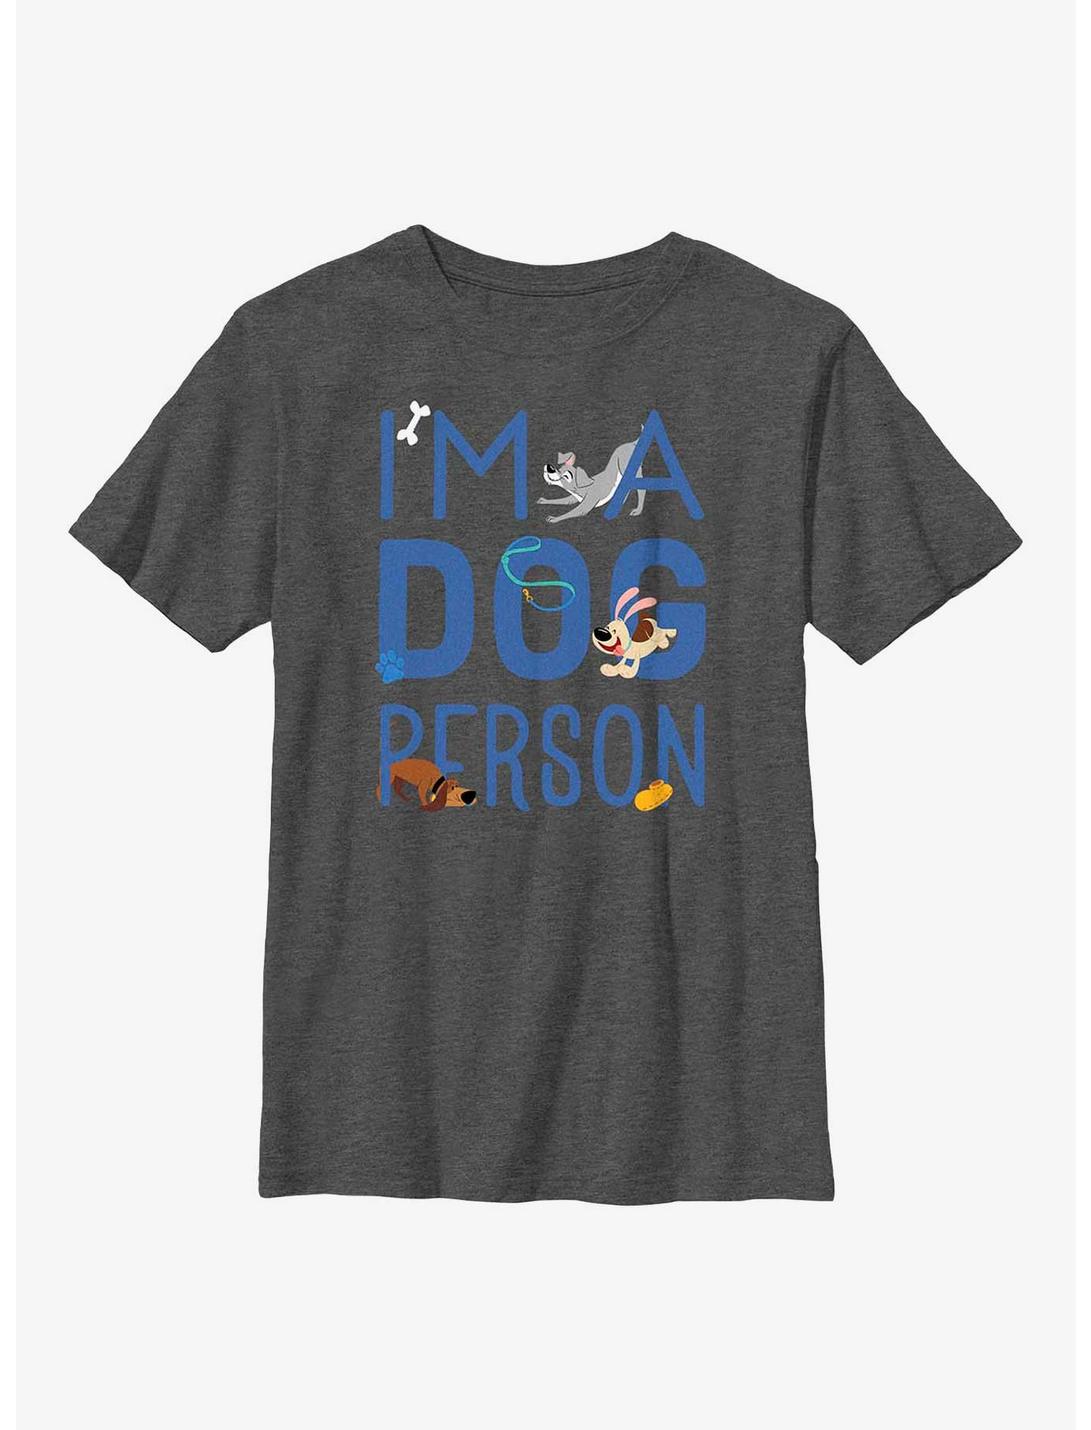 Disney Channel Dog Person Youth T-Shirt, CHAR HTR, hi-res